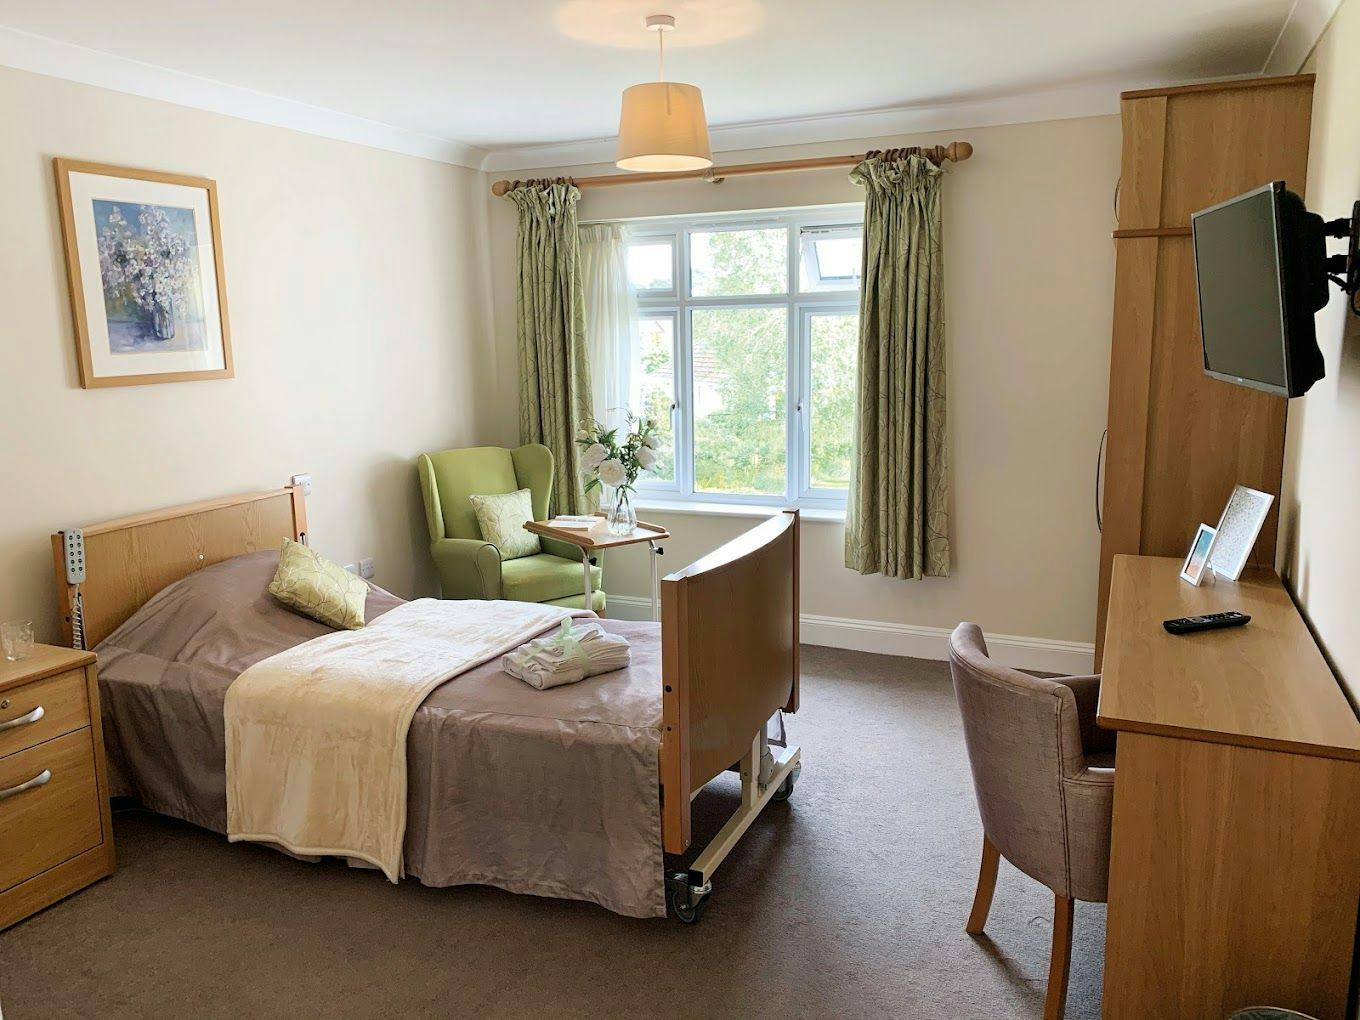 Bedroom of Wickmeads care home in Bournemouth, Hampshire